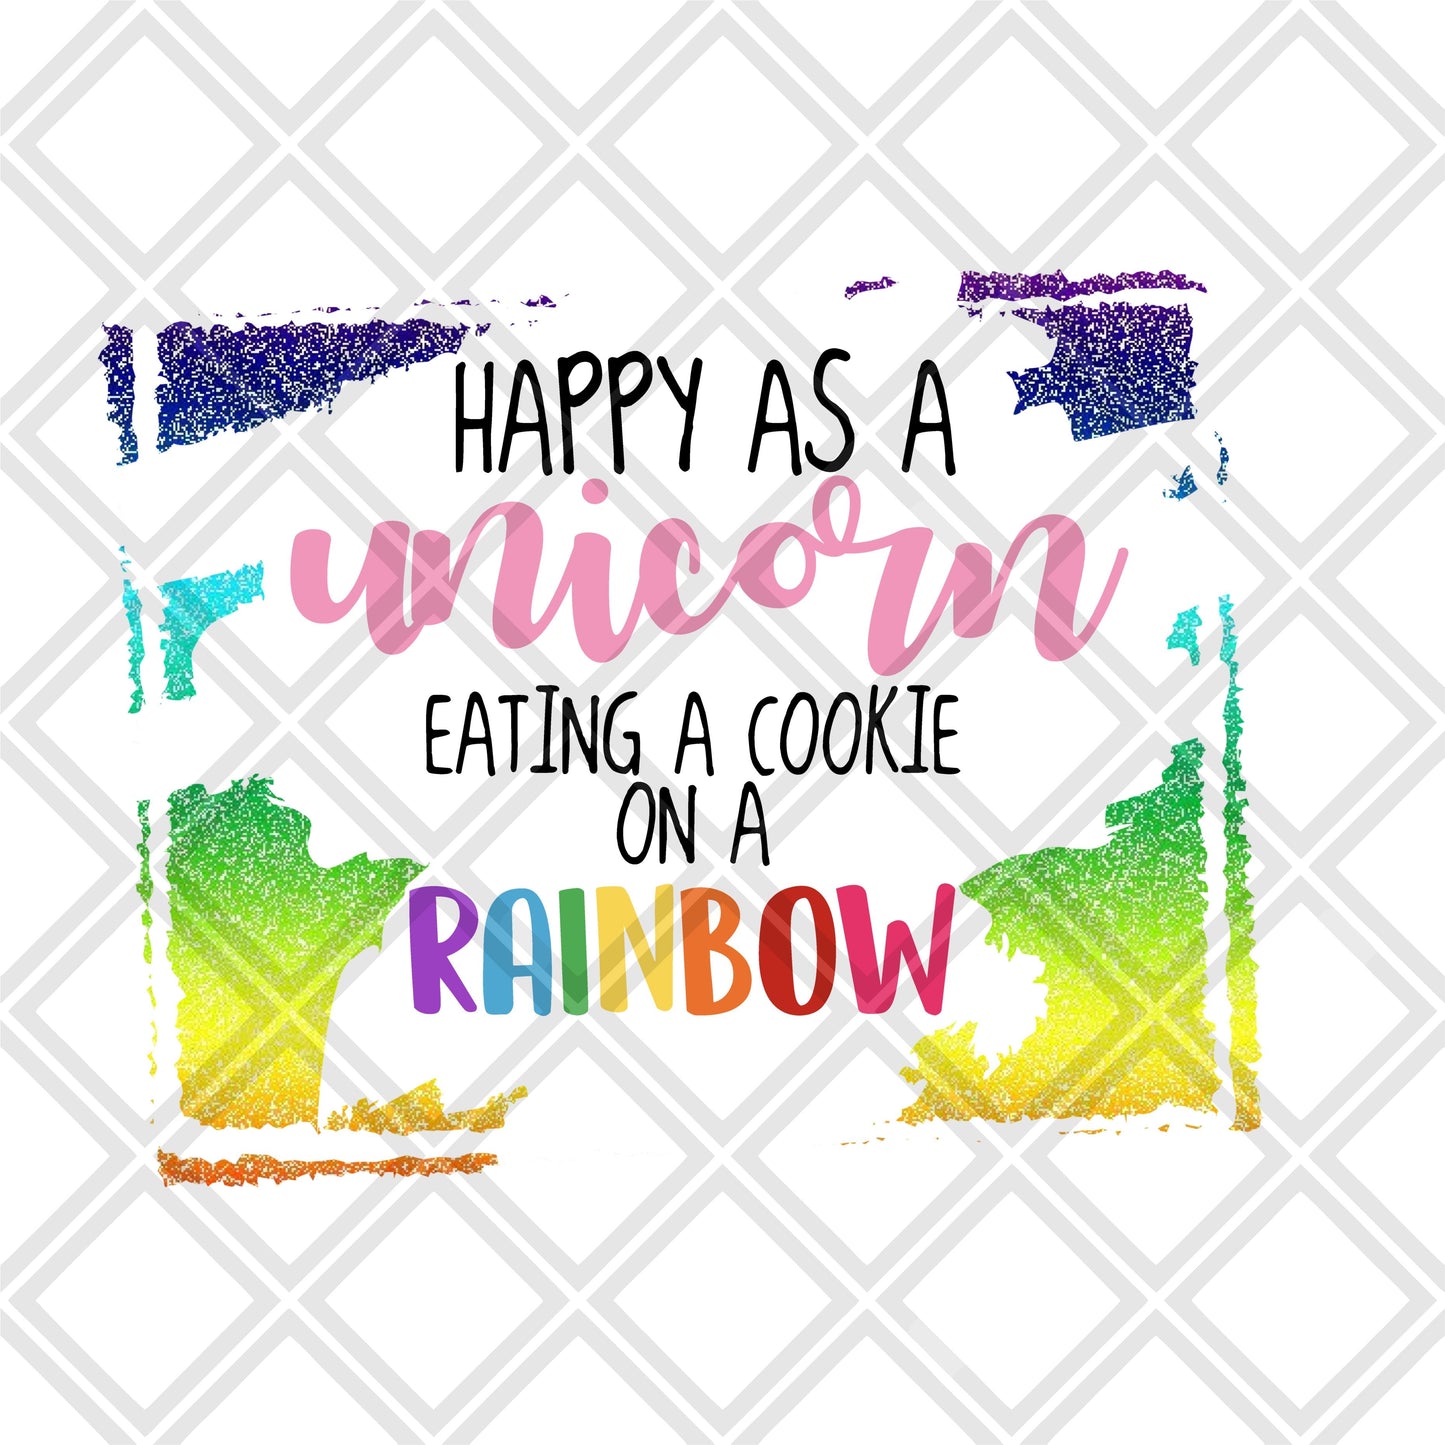 Happy as a unicorn eating a cookie on a Rainbow DTF TRANSFERPRINT TO ORDER